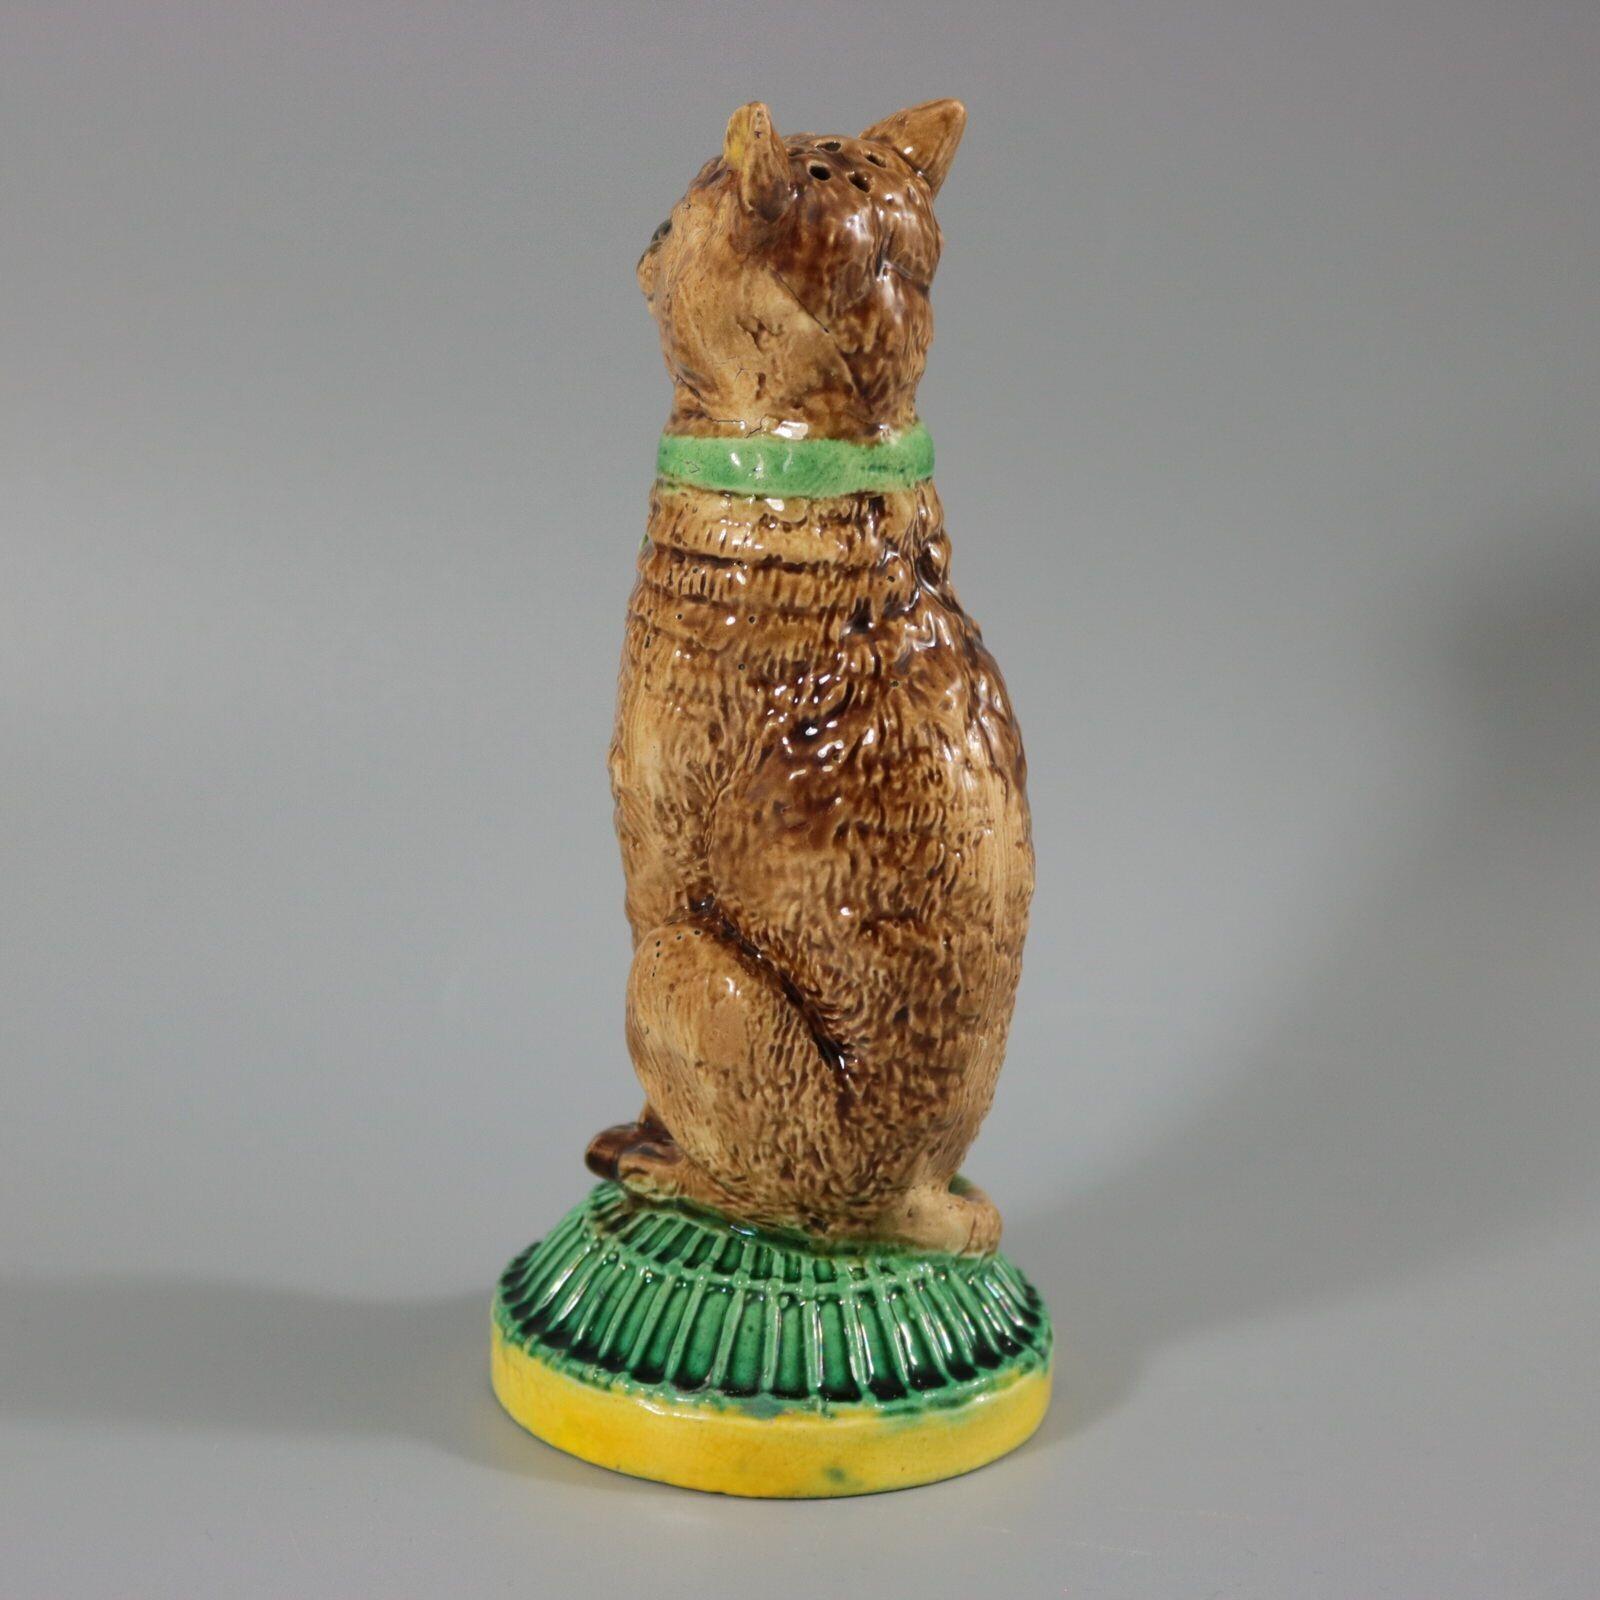 Late 19th Century English Majolica Cat 'Ive Eaten the Canary' Figure